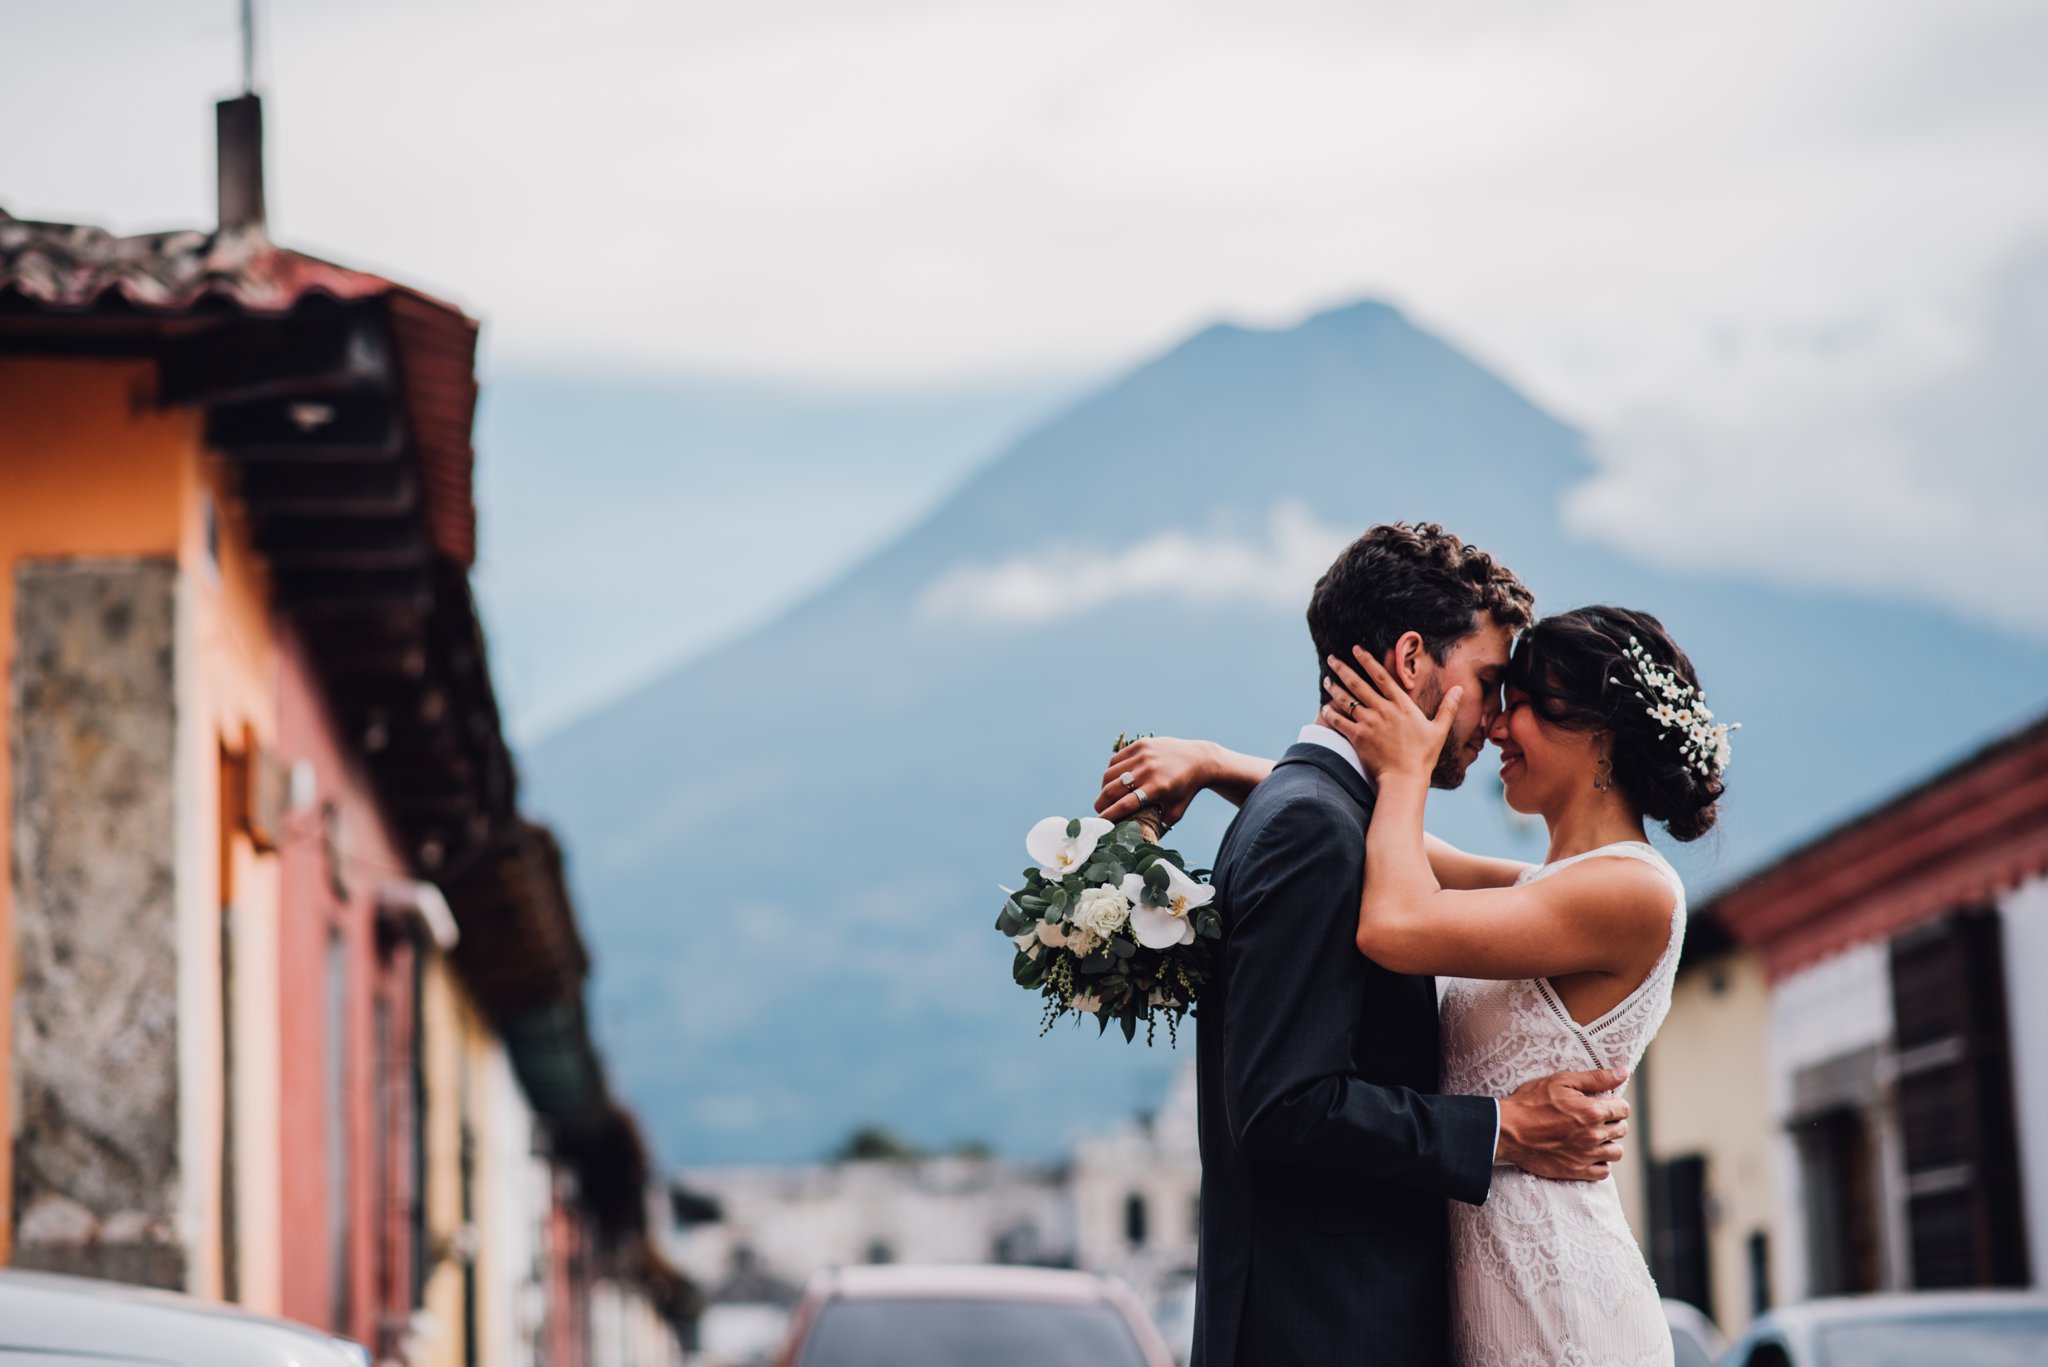 A wedding couple embrace in the shadow of a volcano